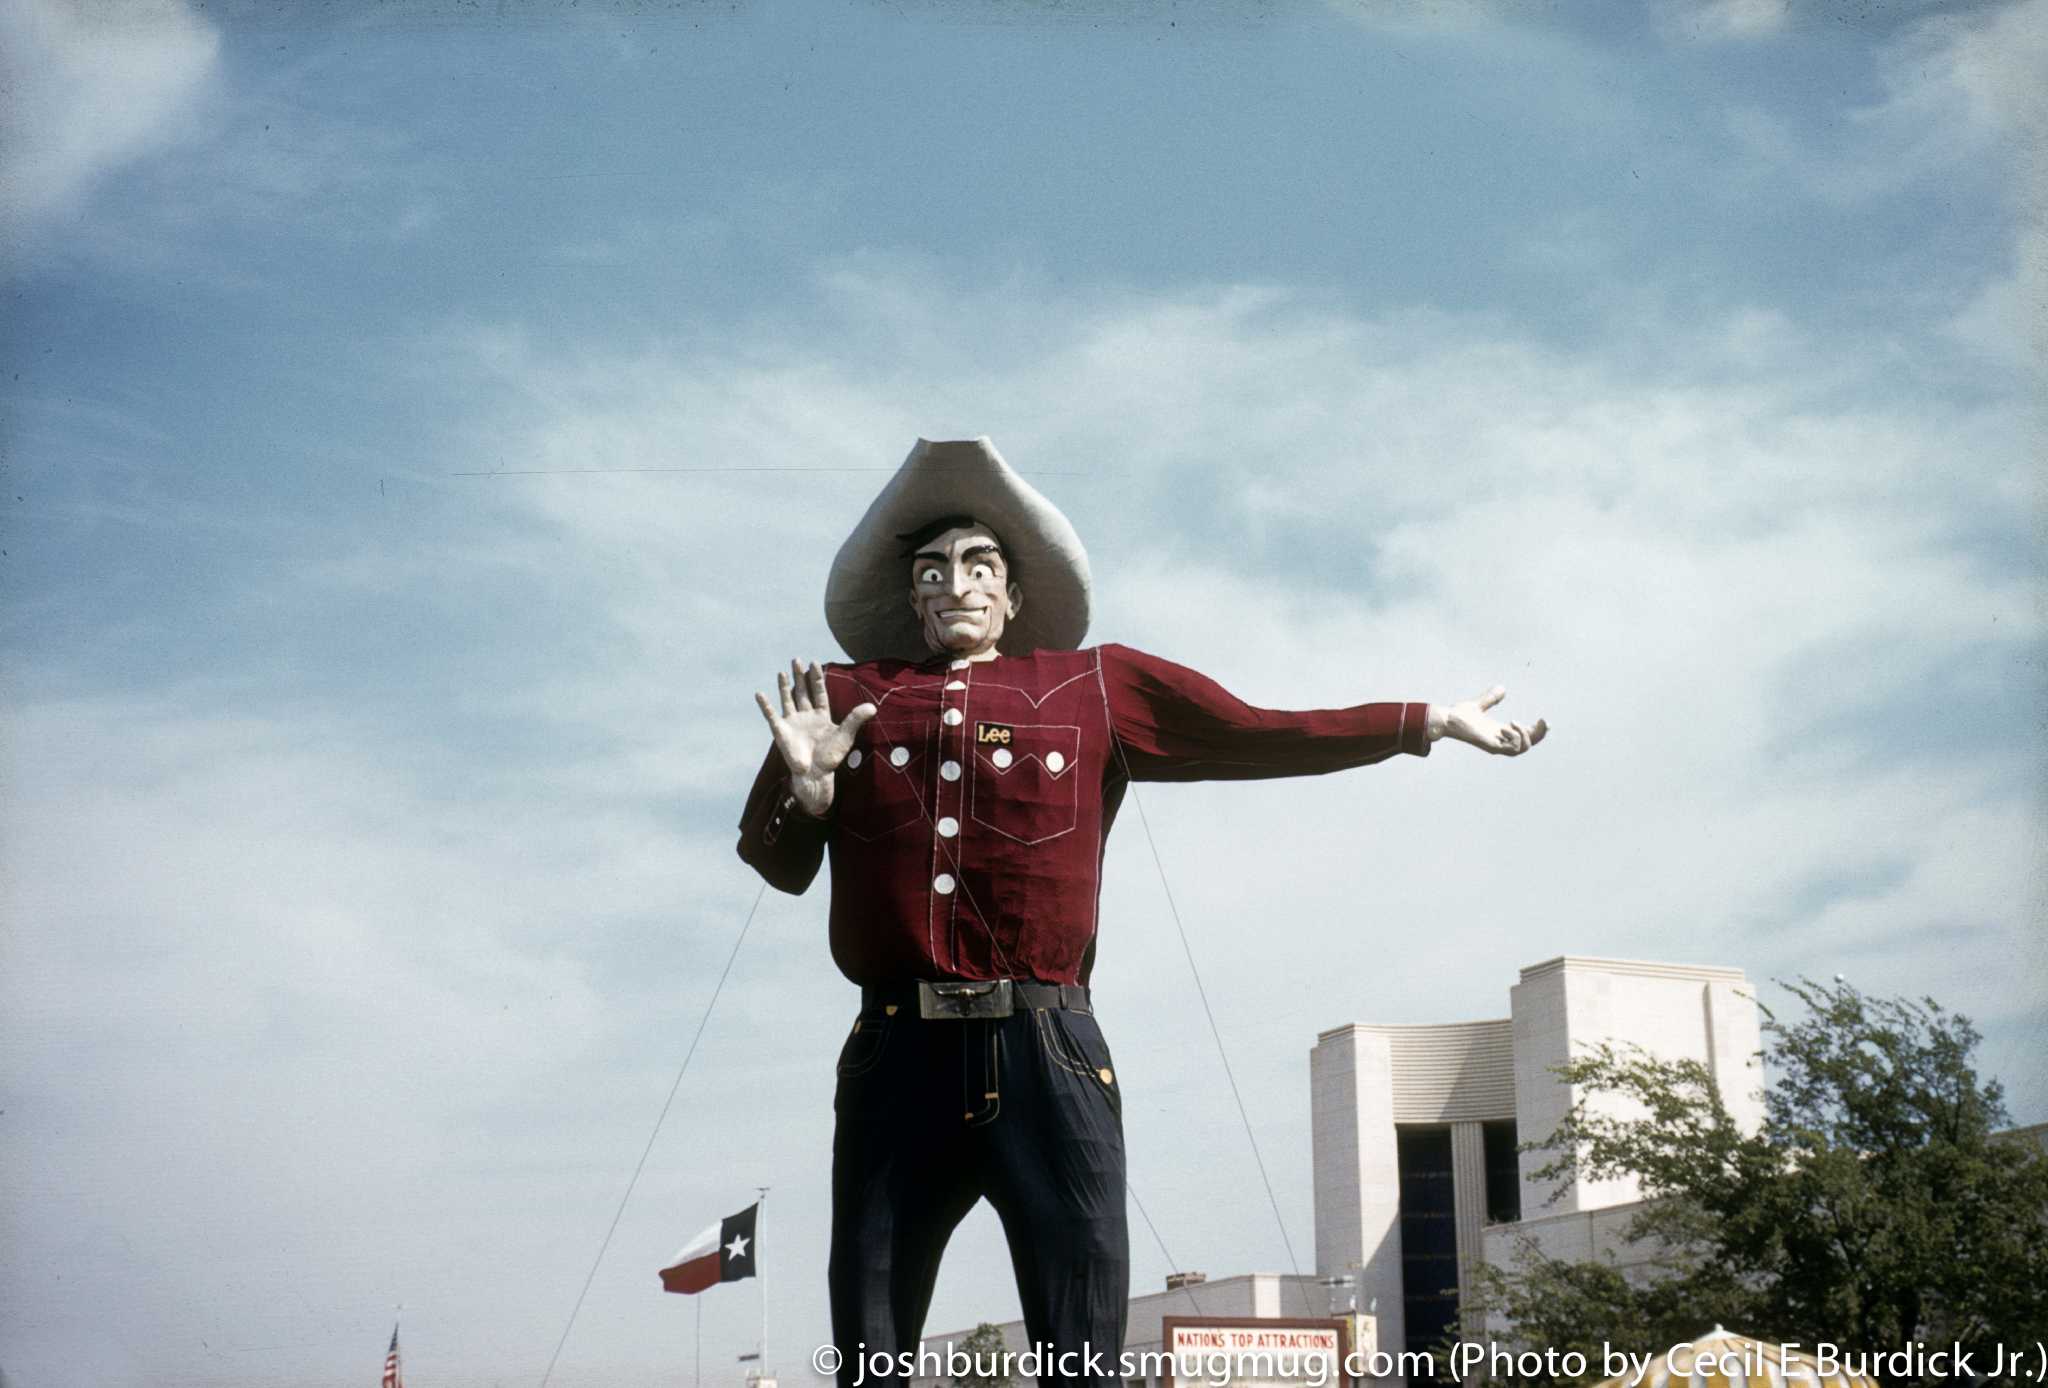 Vintage Texas State Fair photos: See what Big Tex looked like the year Elvis visited ...2048 x 1388